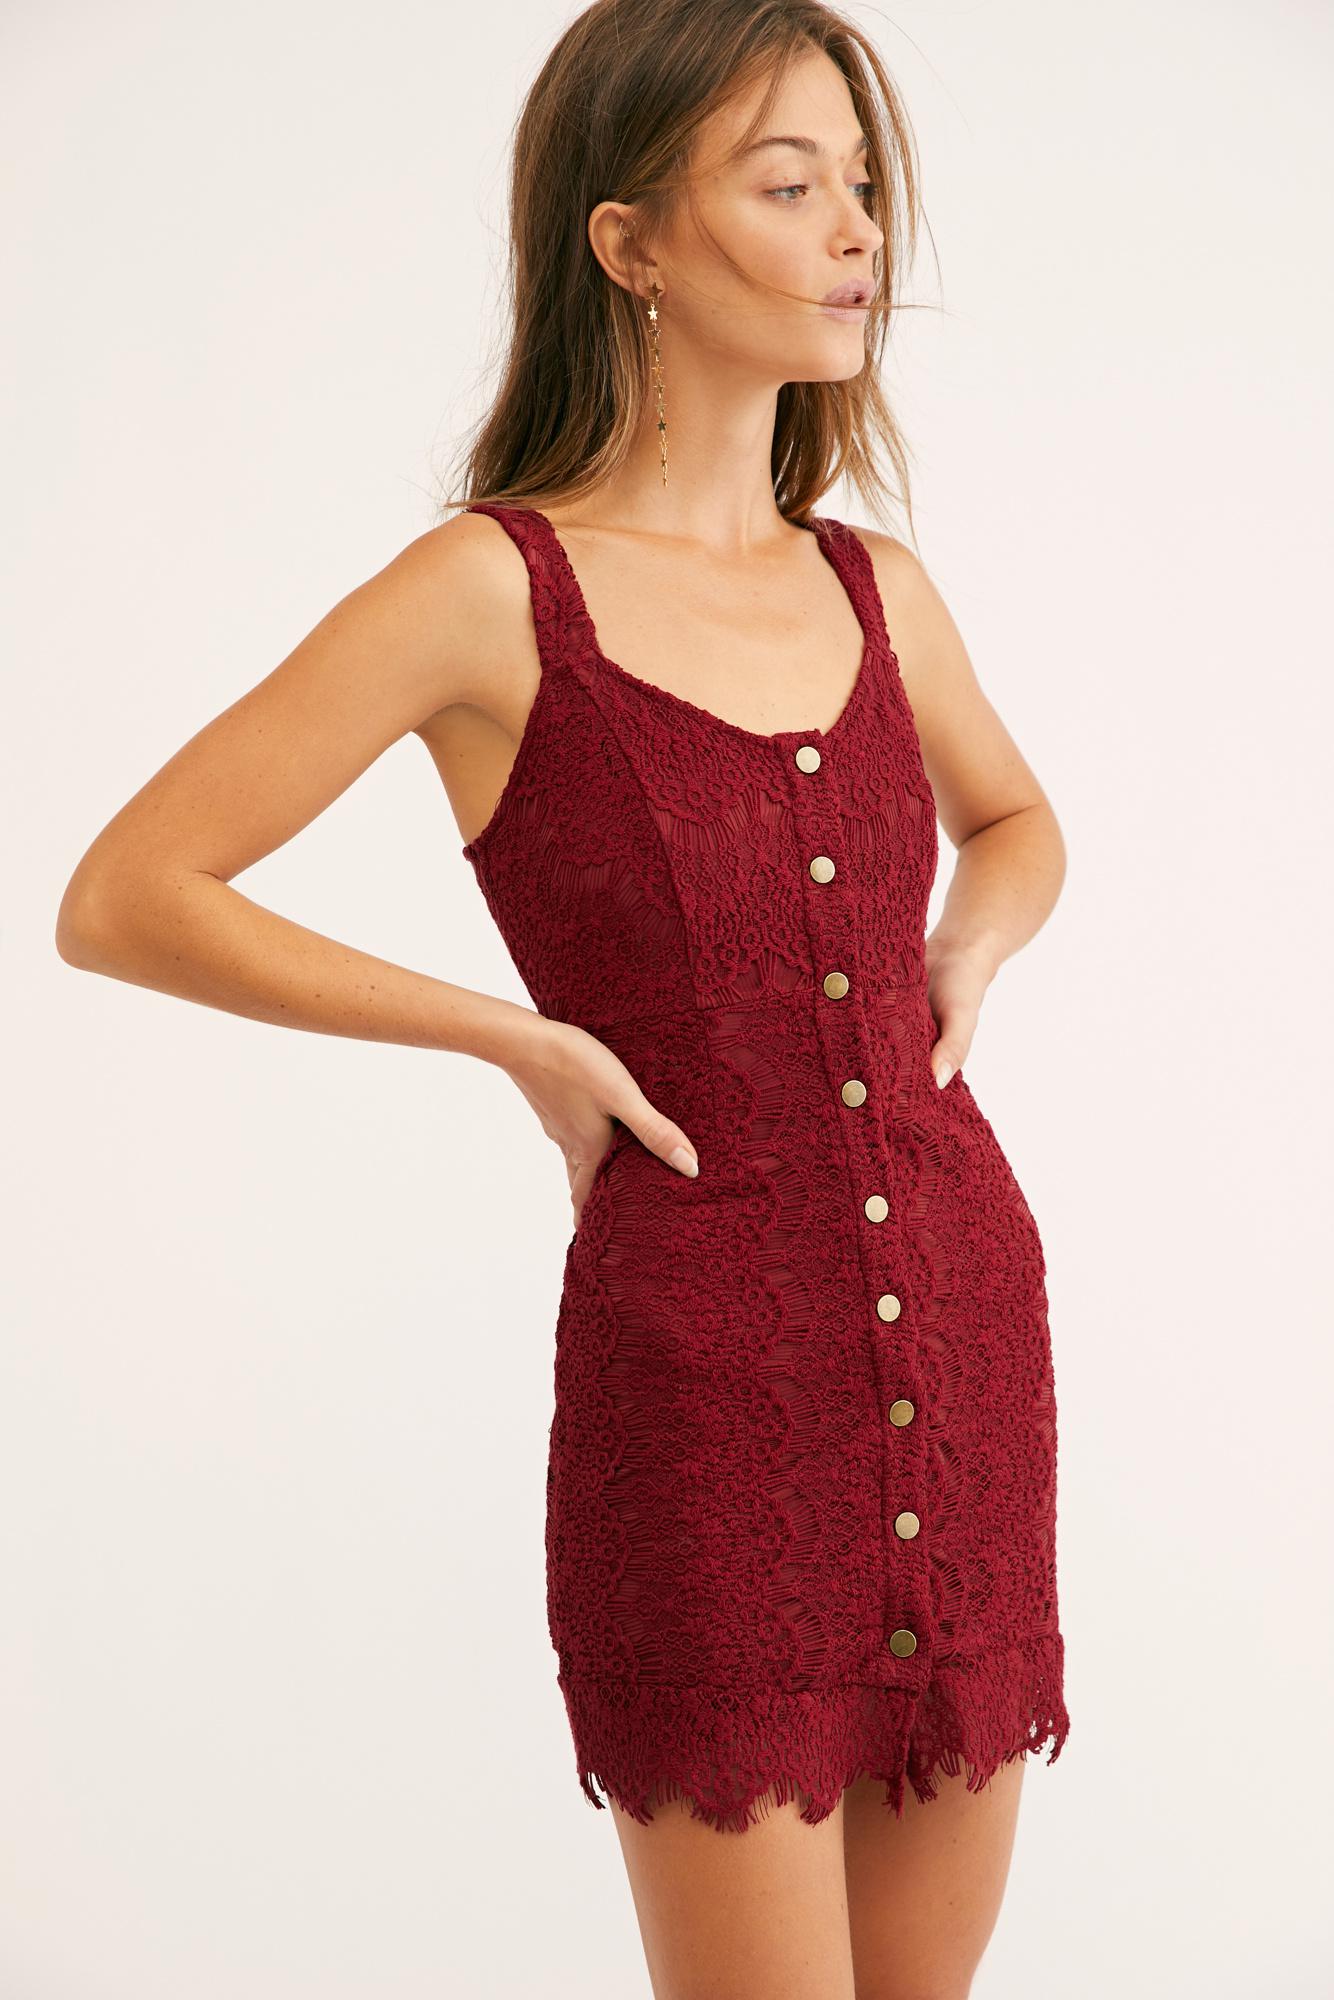 Free People Lace Meant To Be Mini Slip Dress By Intimately - Chemise in